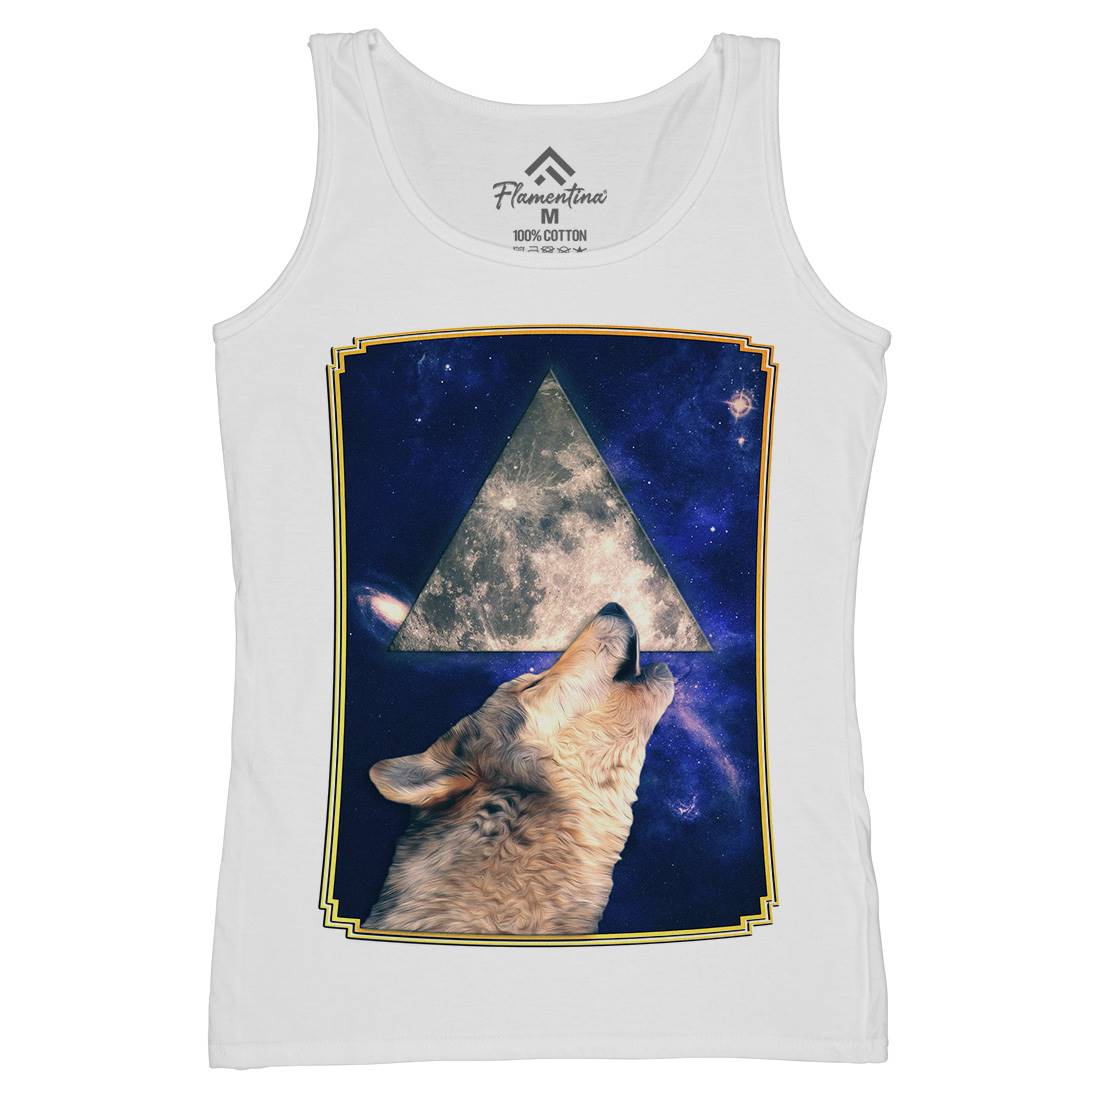 Howling Wolf Womens Organic Tank Top Vest Space A848